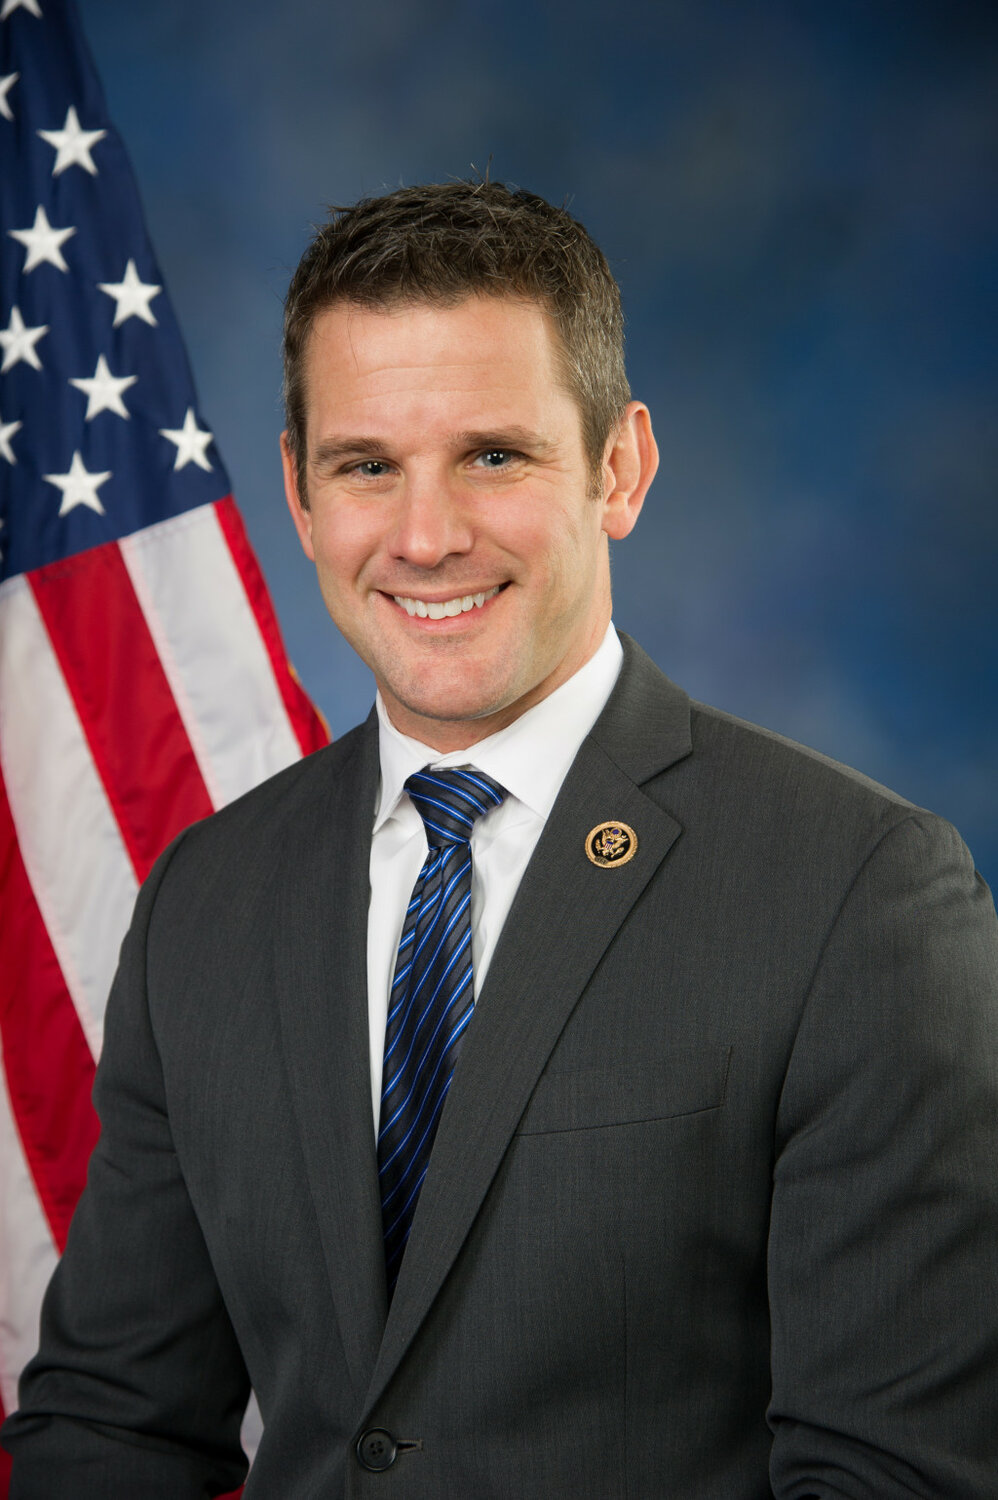 Adam Kinzinger (R-Ill.), who represents over 700,000 Illinoisans in the state's 16th District, was one of 10 Republicans in the House of Representatives to impeach President Donald Trump for inciting insurrection.